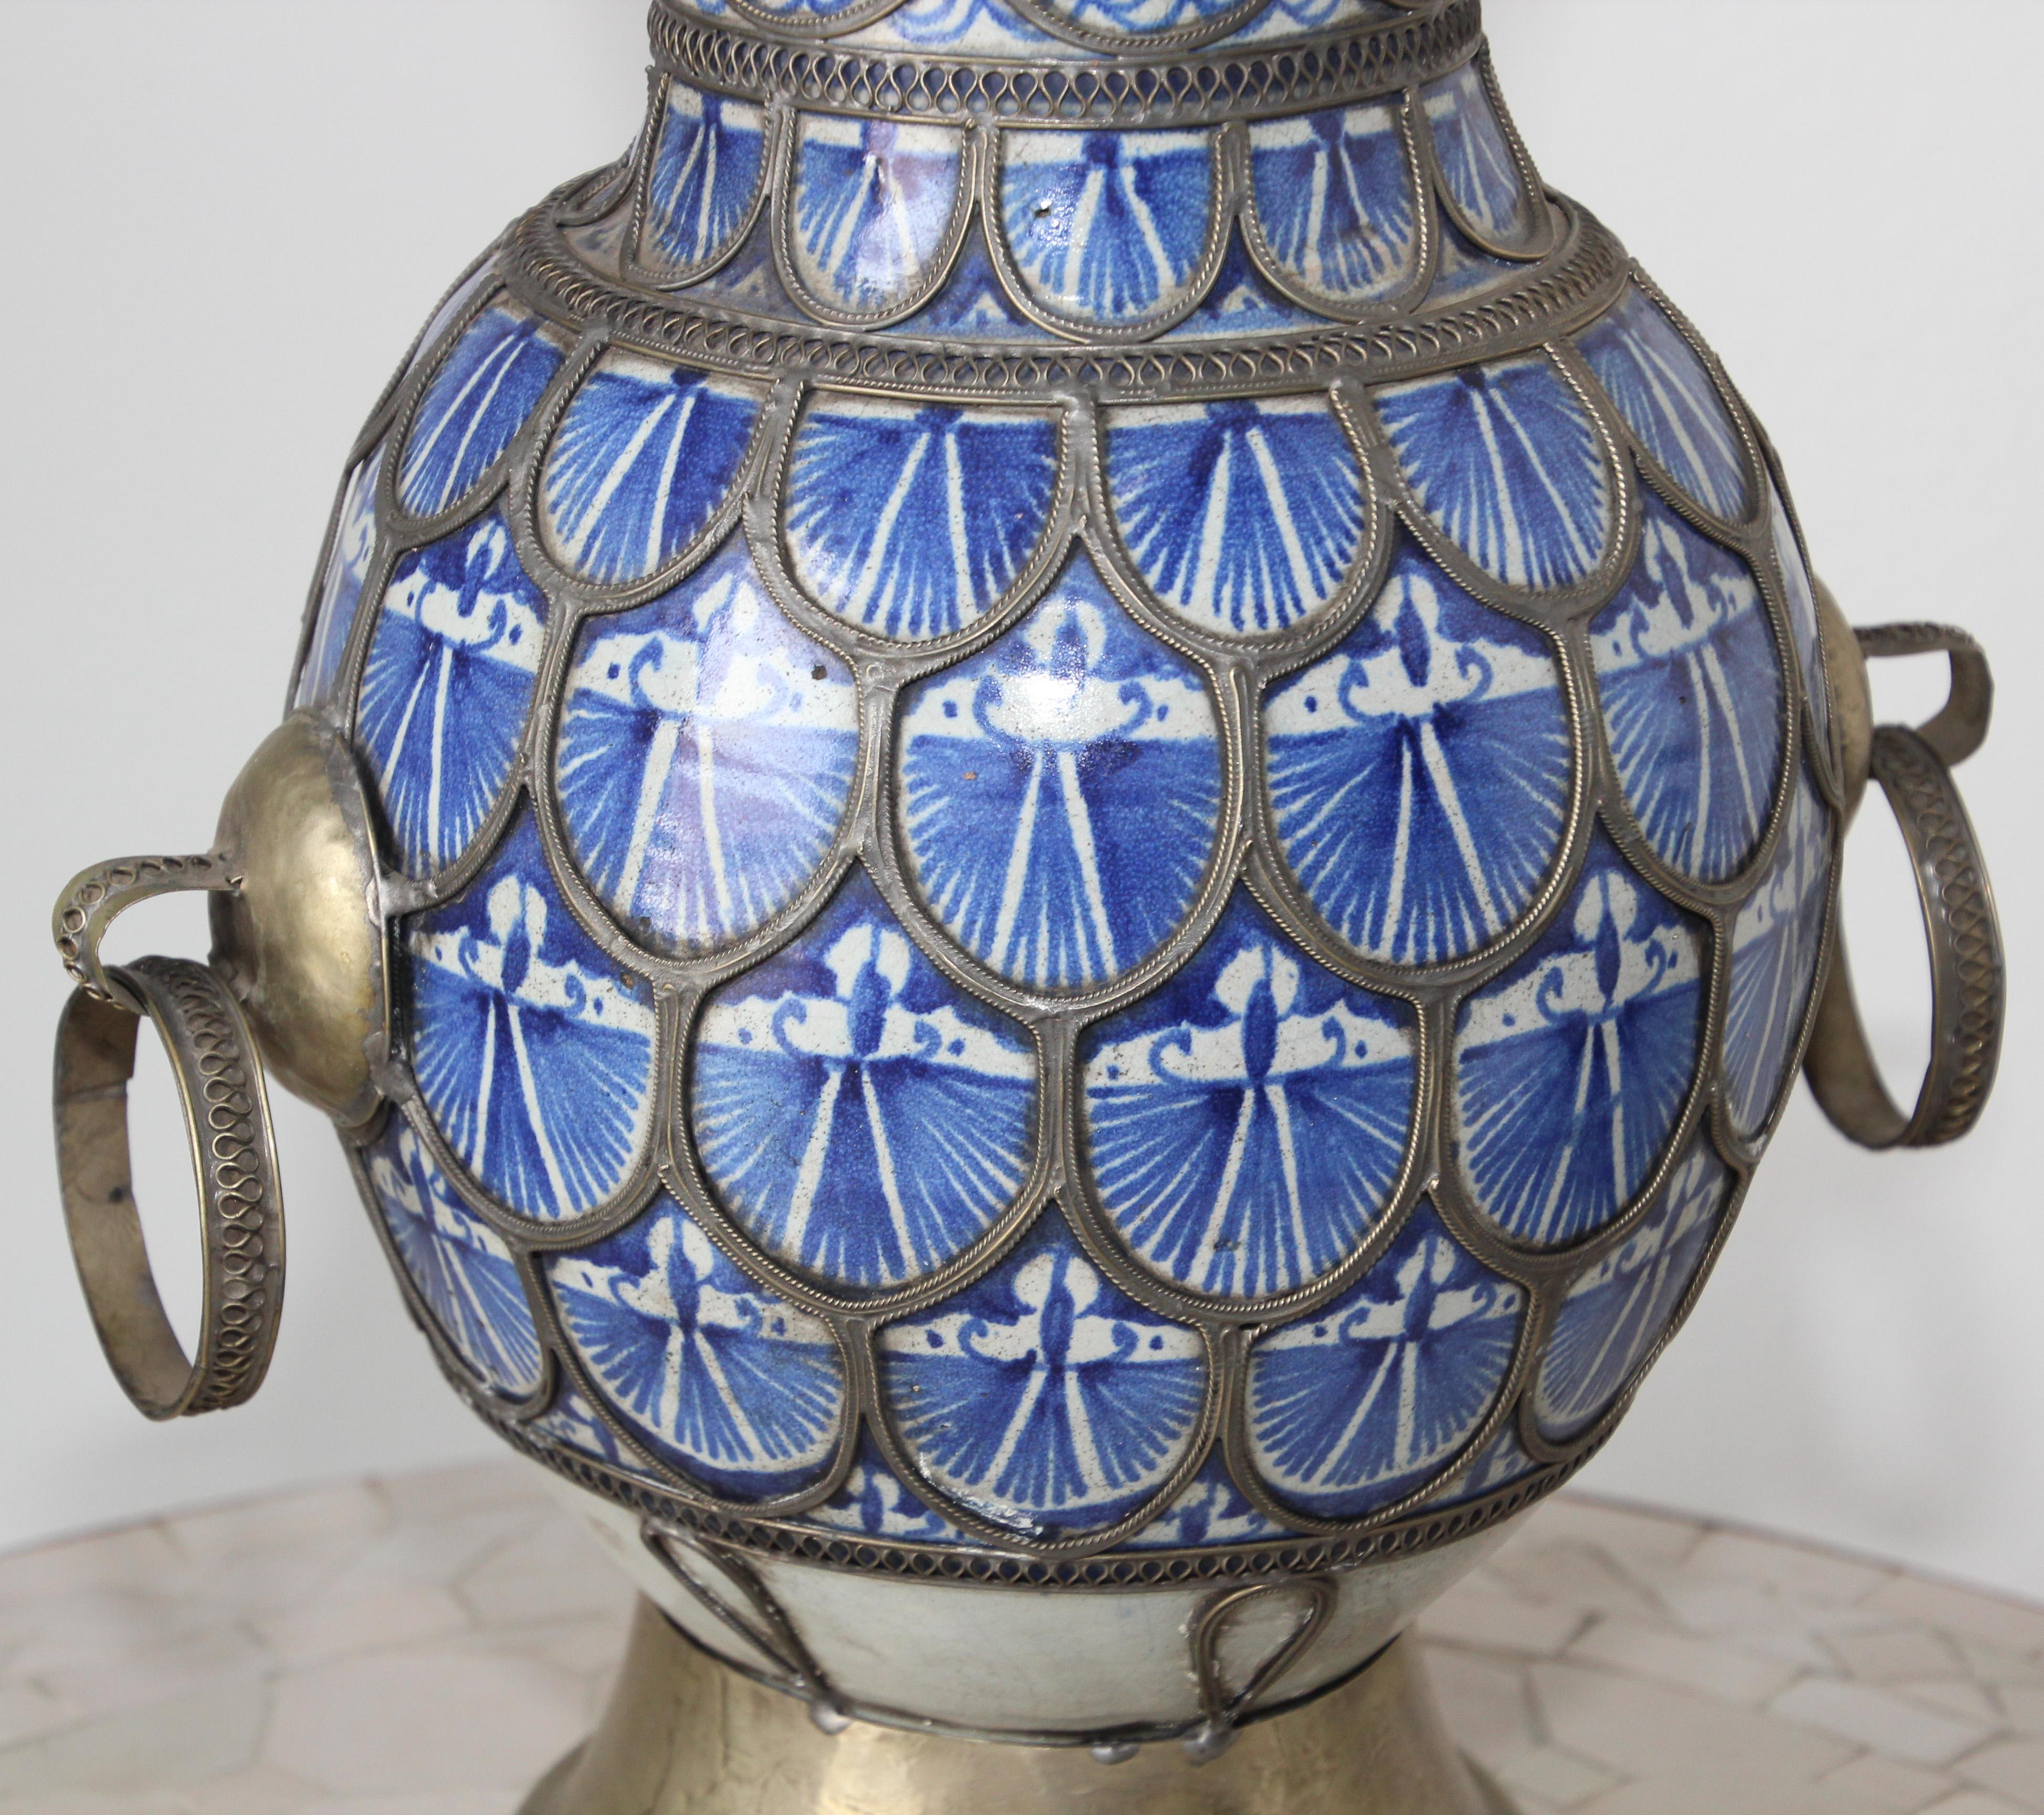 Antique Moorish  Ceramic Vase from Fez Blue and White with Silver filigree For Sale 8